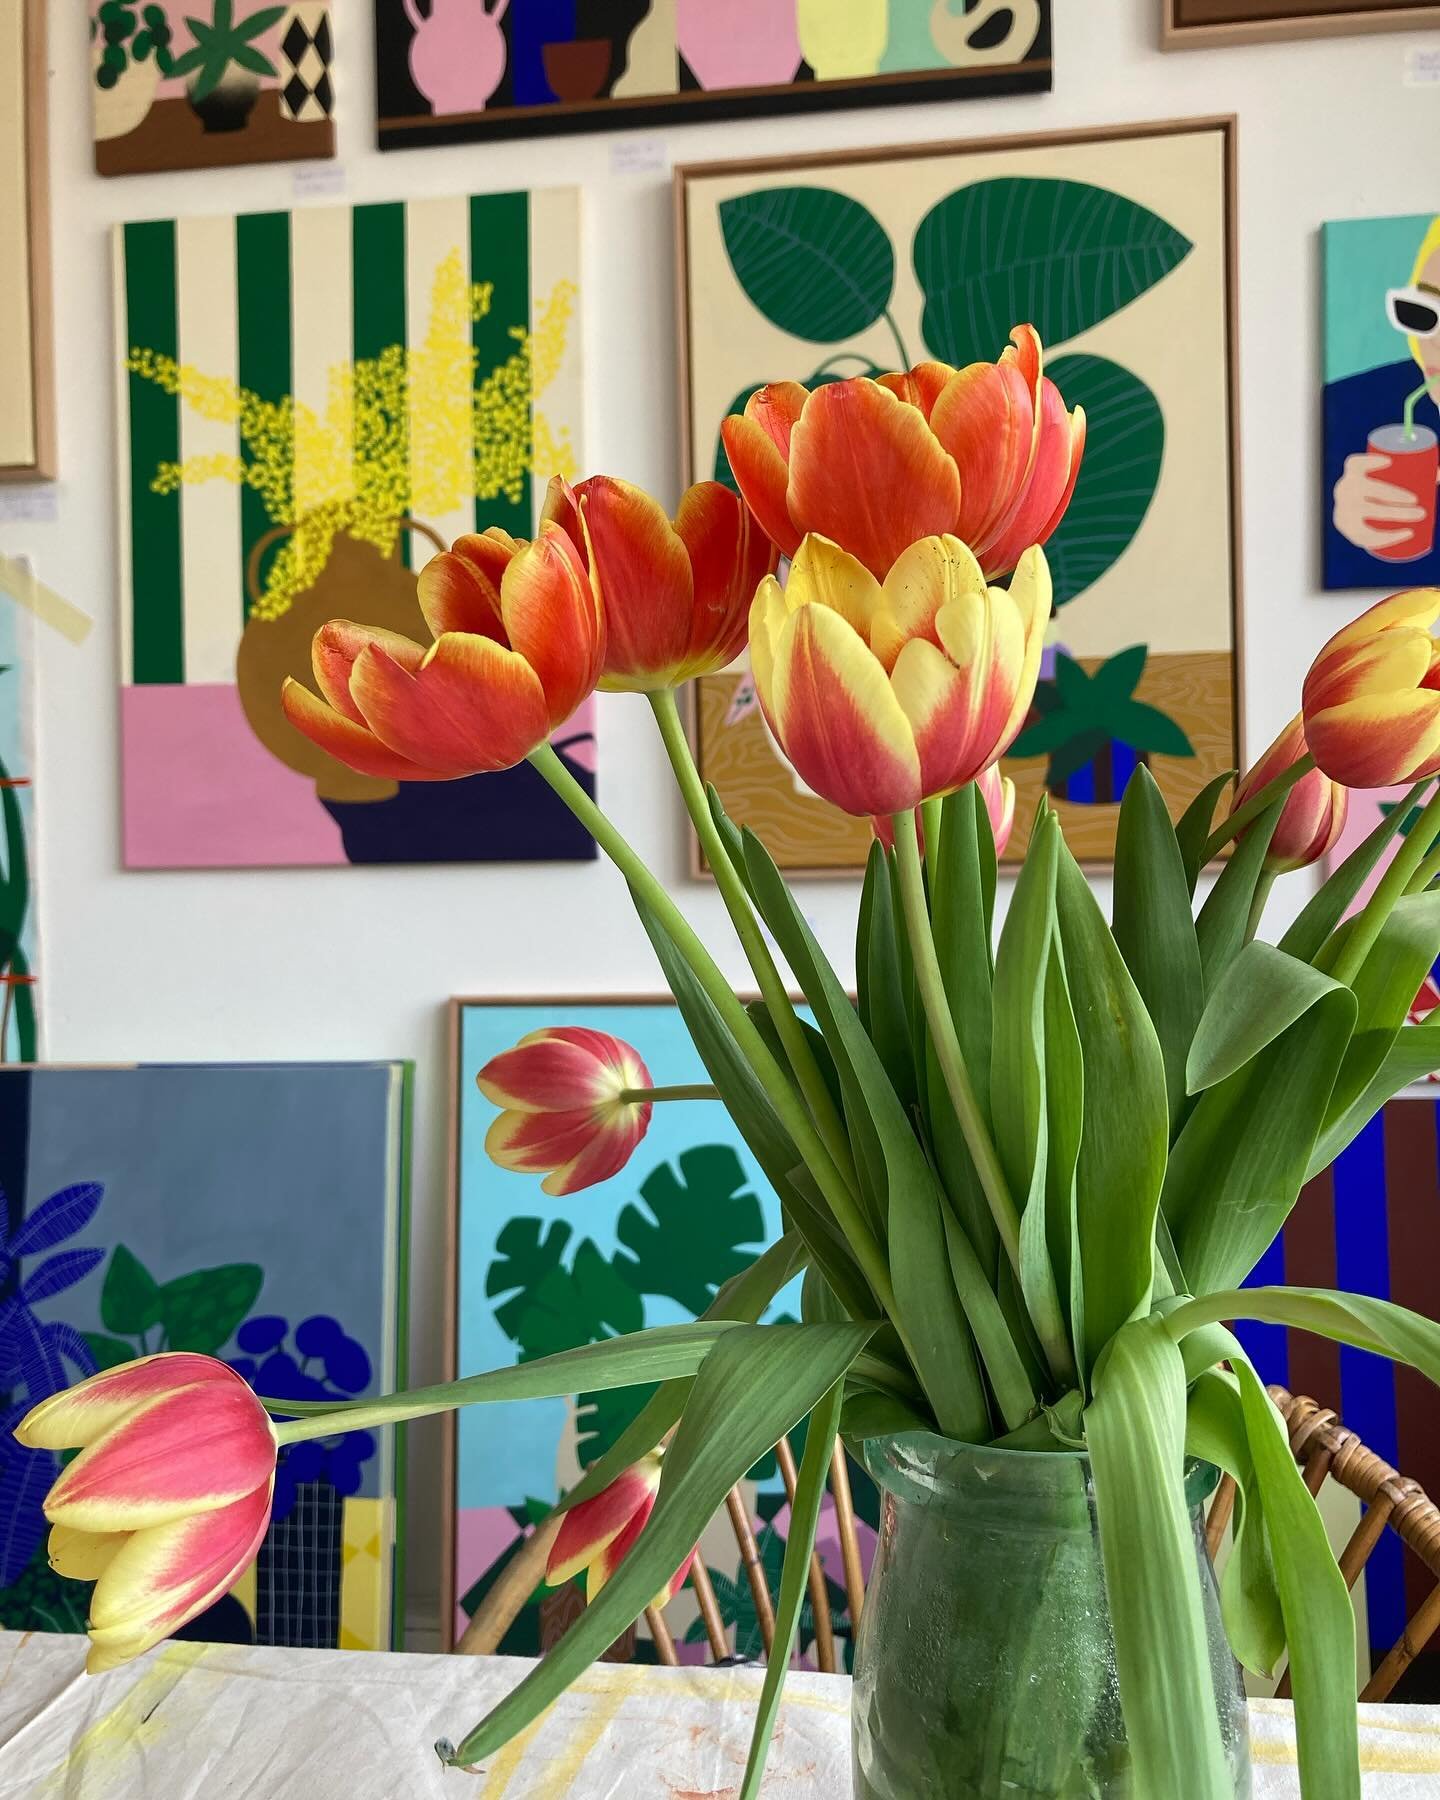 The tulips are still ok! 🌷🌷 Gorgeous day in Brighton. Come and visit me in @phoenix_artspace over the weekend on your way to the beach!! Over 100 artists and makers are opening their studios in the building. Don&rsquo;t miss it! ✌️💛